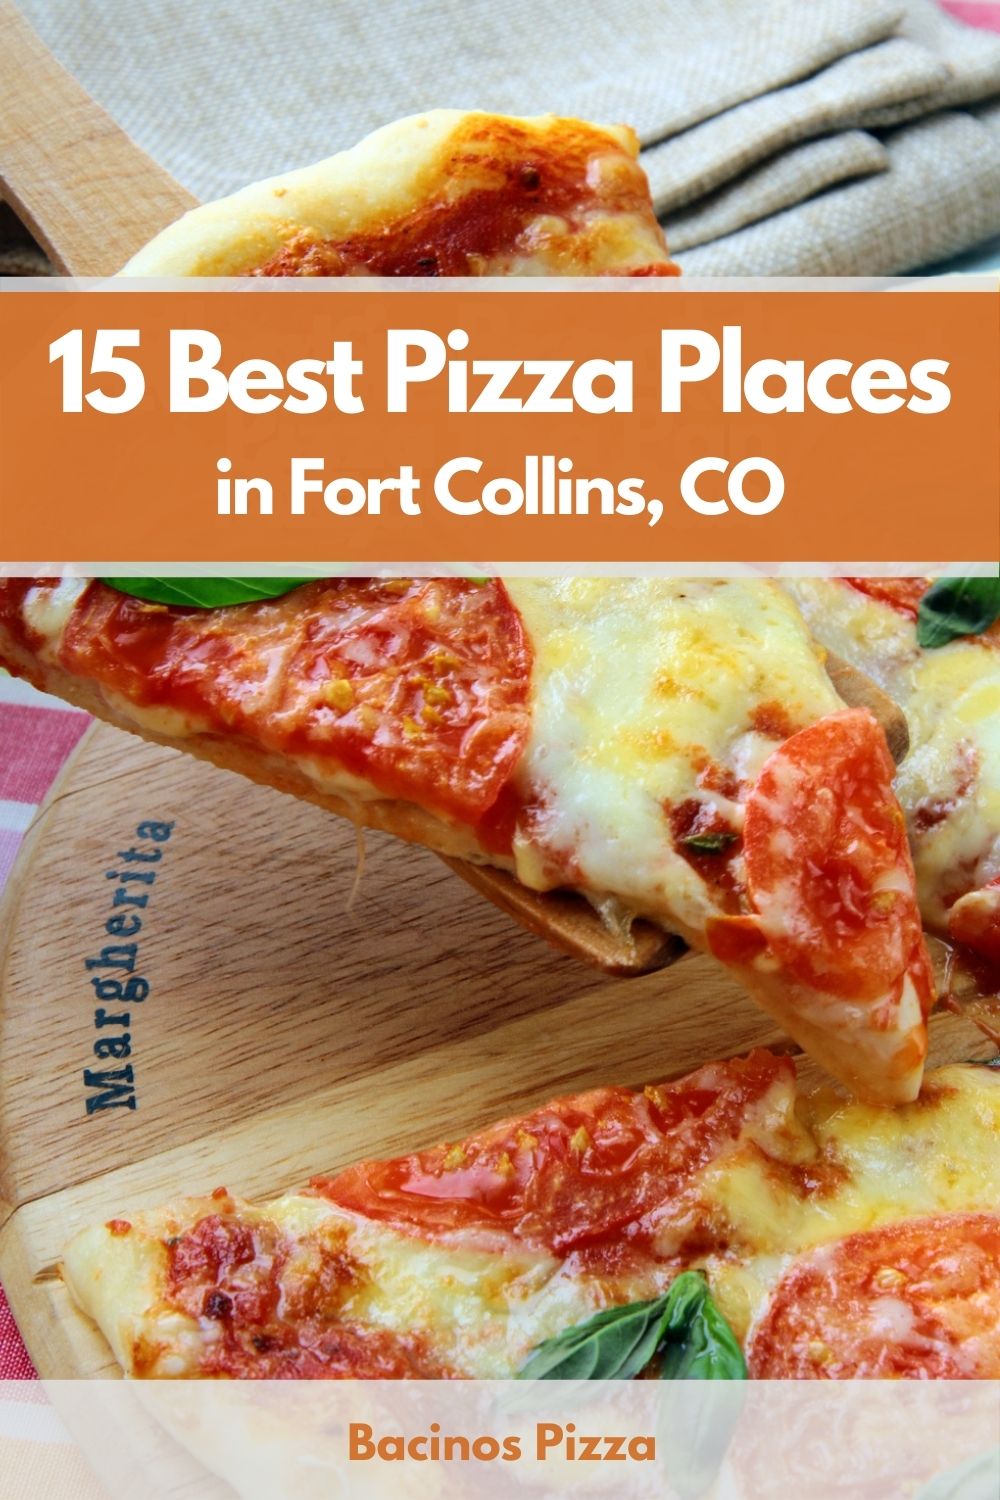 15 Best Pizza Places in Fort Collins, CO pin